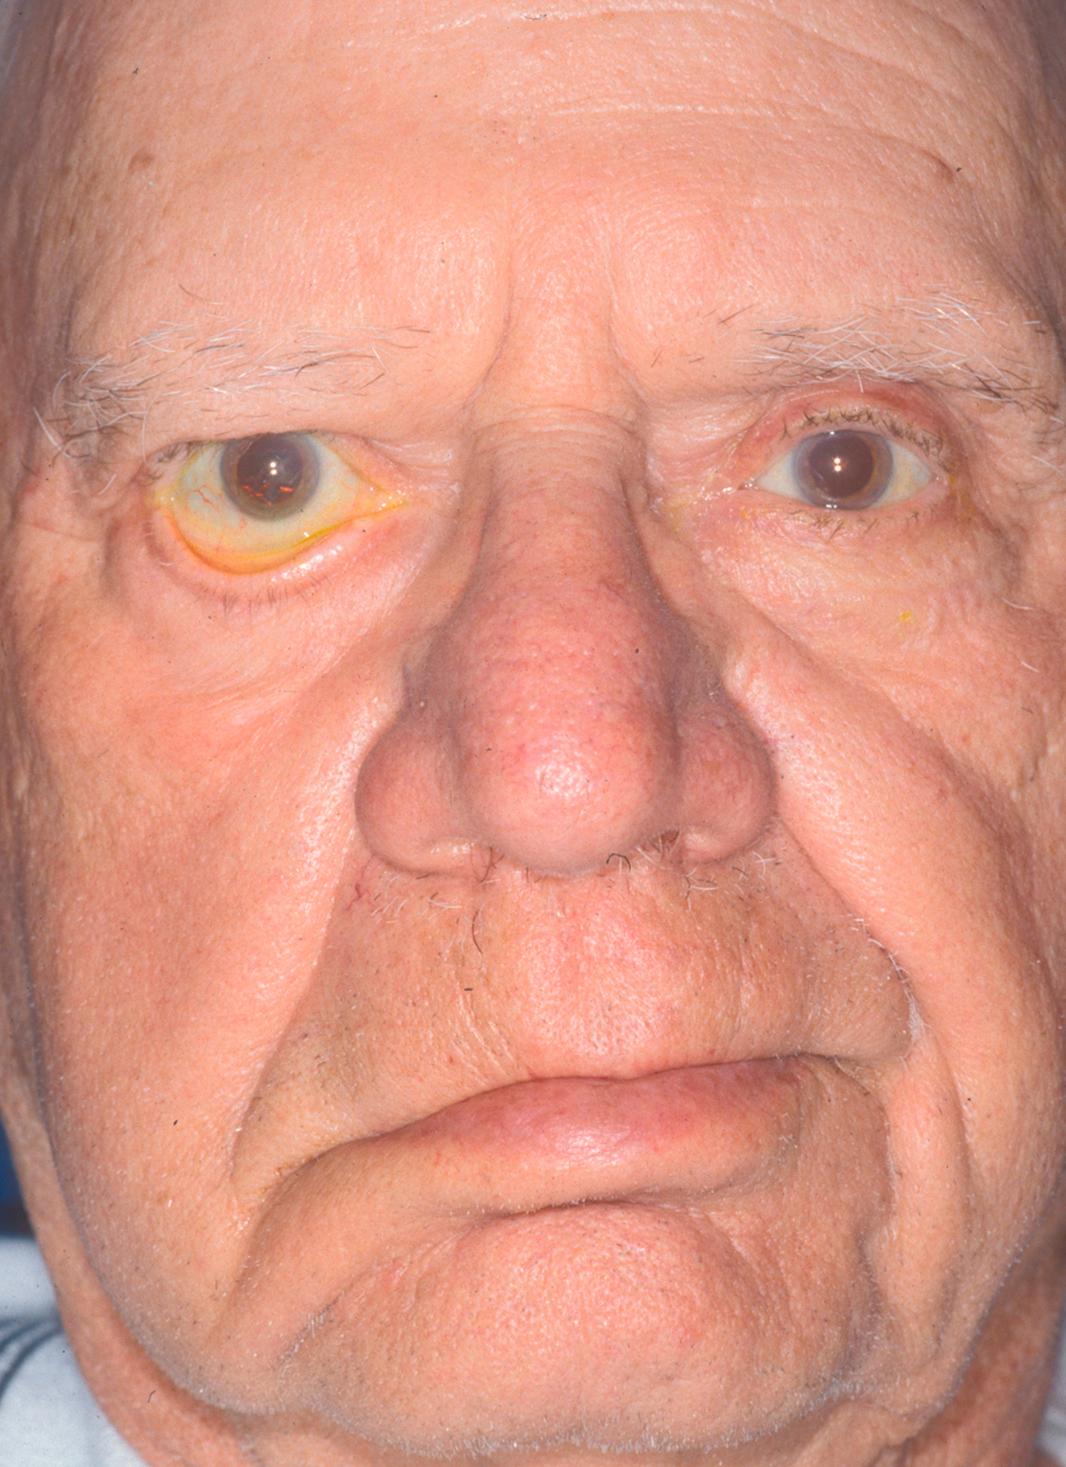 Figure 3.4, Paralytic ectropion caused by right facial nerve palsy. Note the flattened nasolabial fold and brow ptosis accompanying the ectropion.